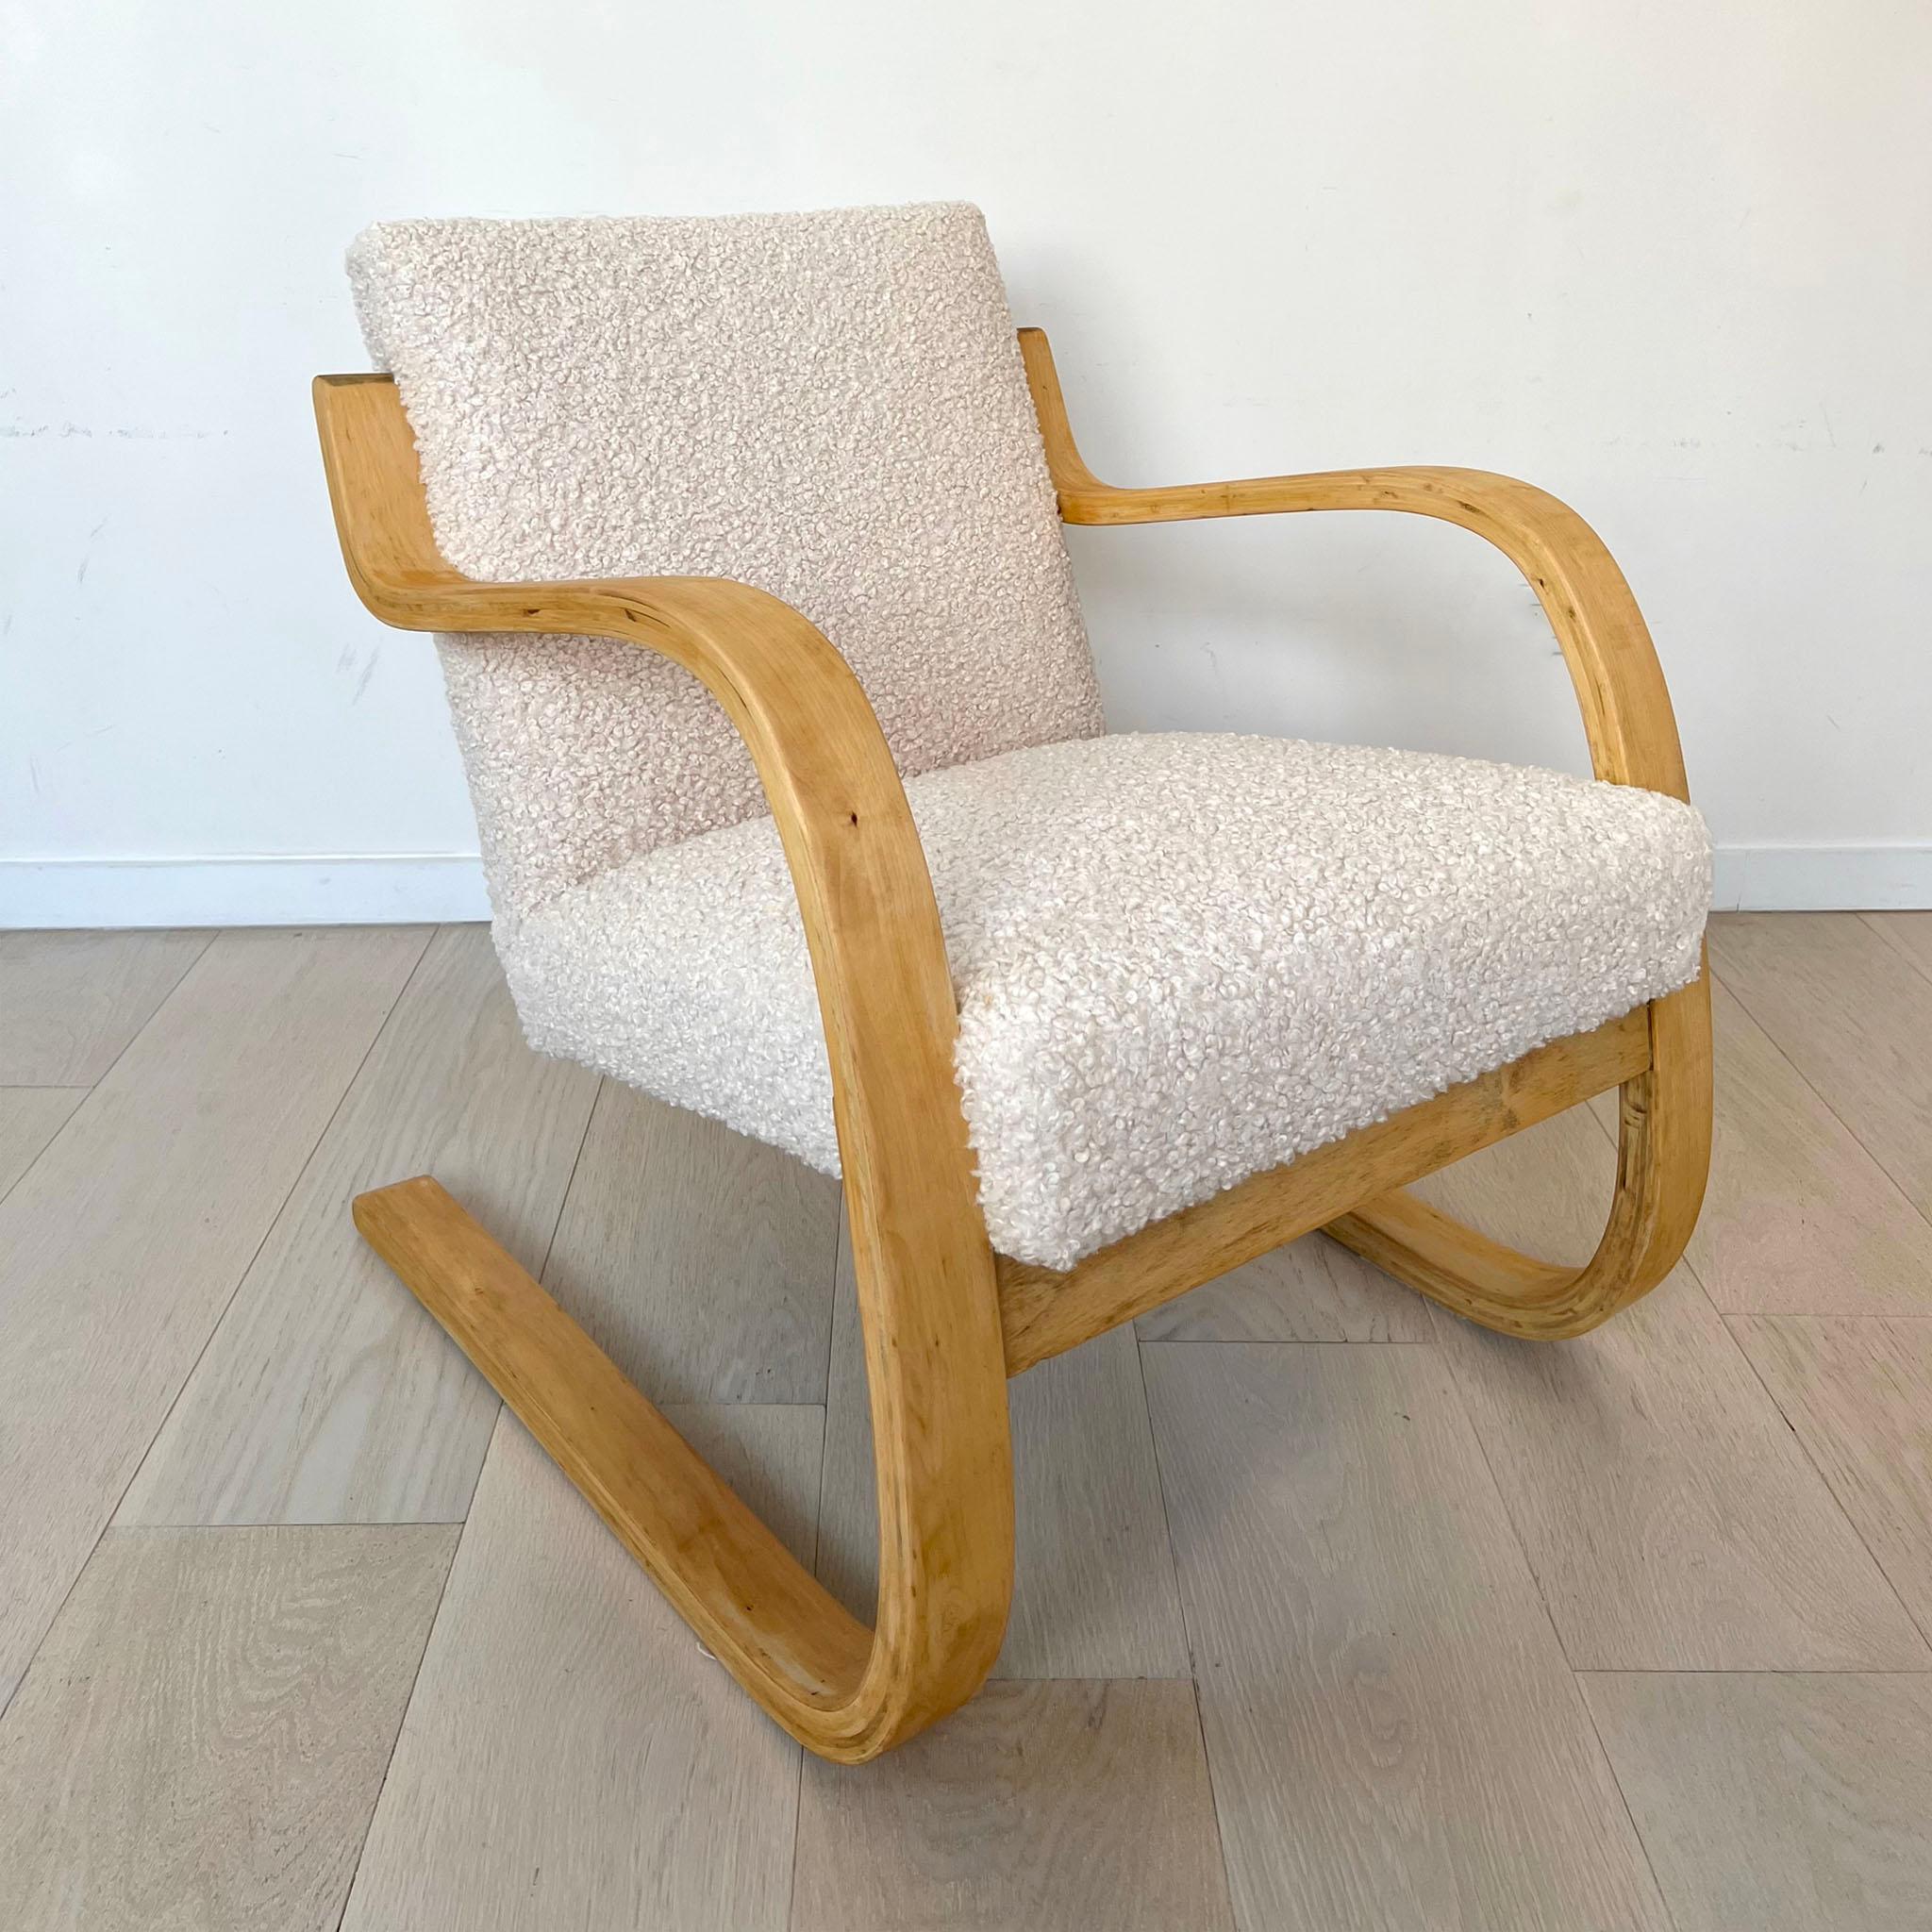 Alvar Aalto armchair model 403, designed originally in 1933. Aalto was an innovative designer who experimented with bentwood. The birch frame consists of layers of plywood which flex allowing for sitting comfort. The seat and backrest have been